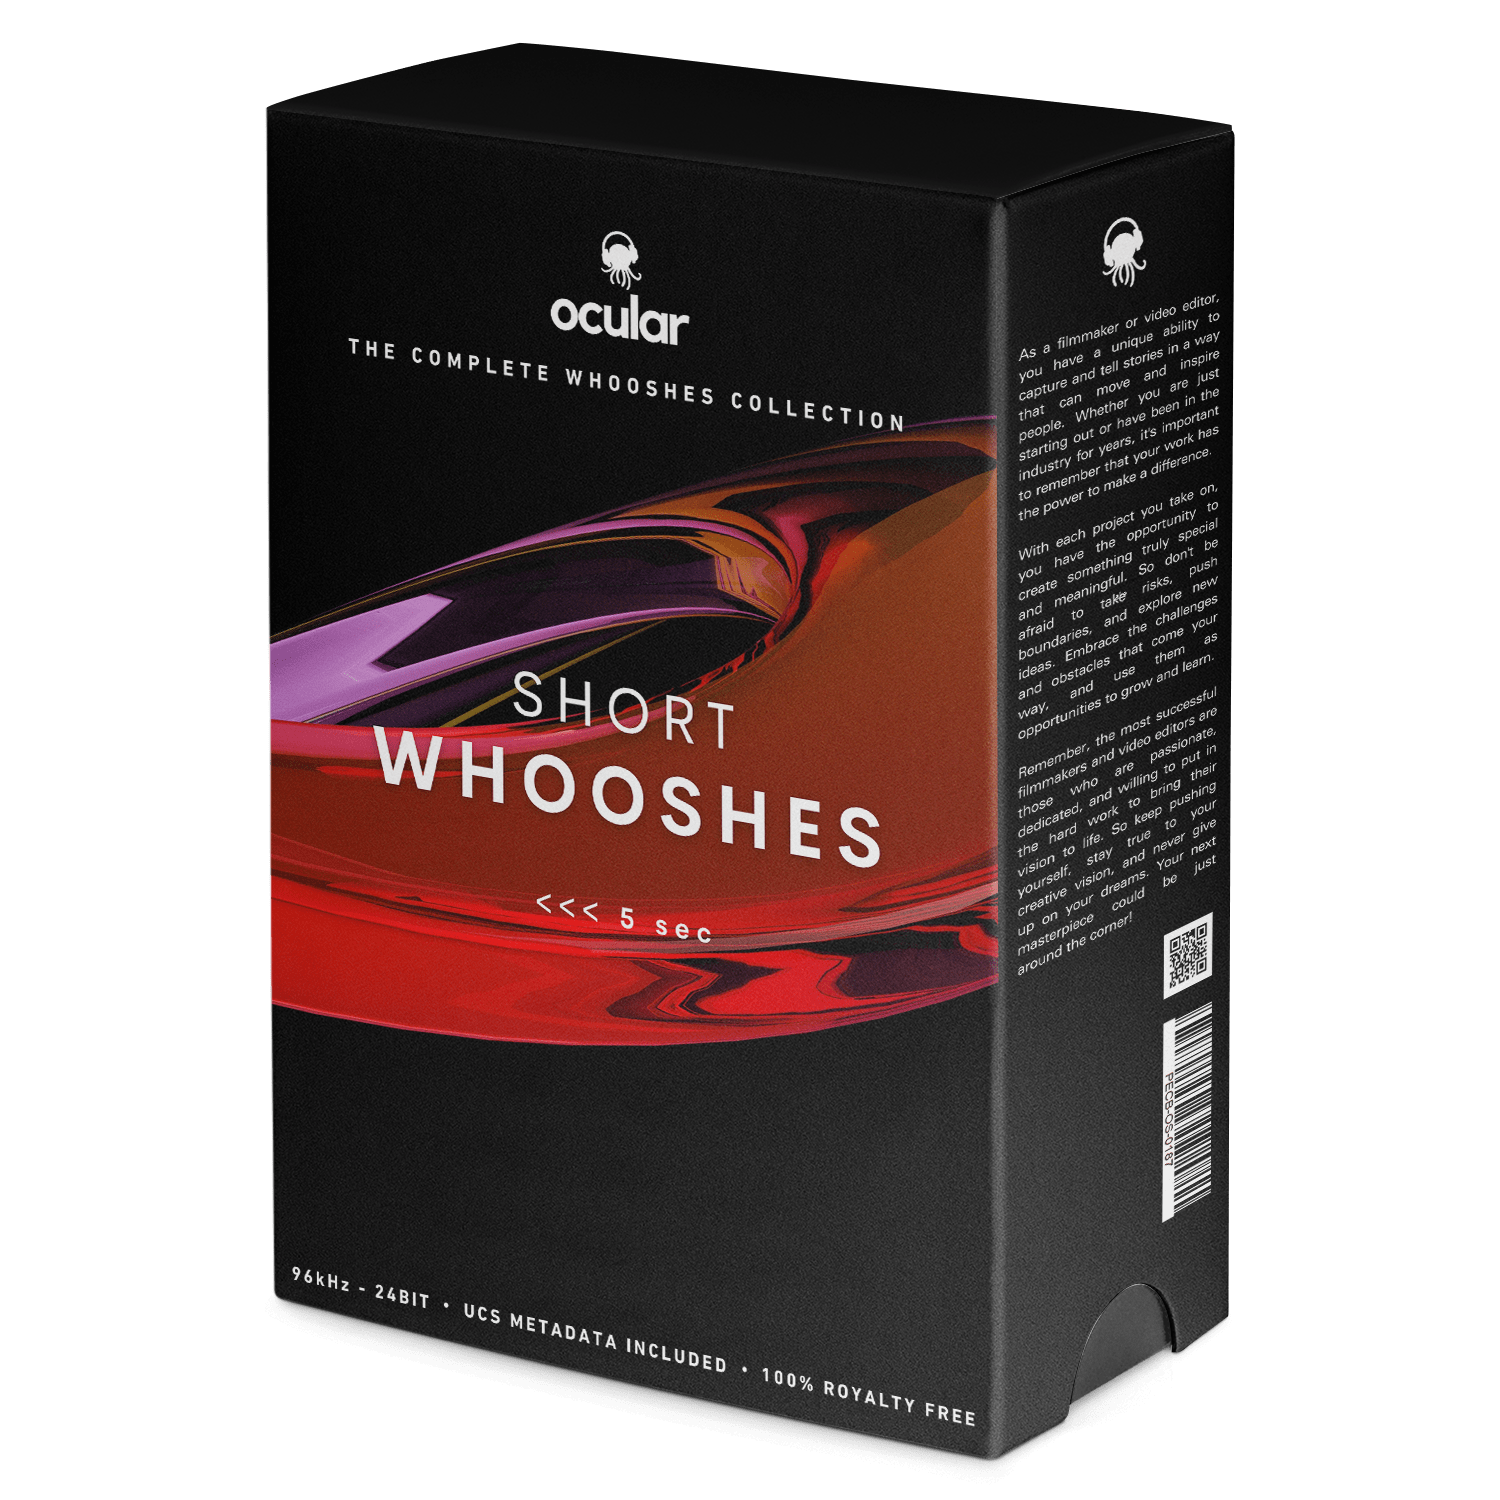 Short Whooshes Sound Effects for Video Editing. Professional Sound FX Library.